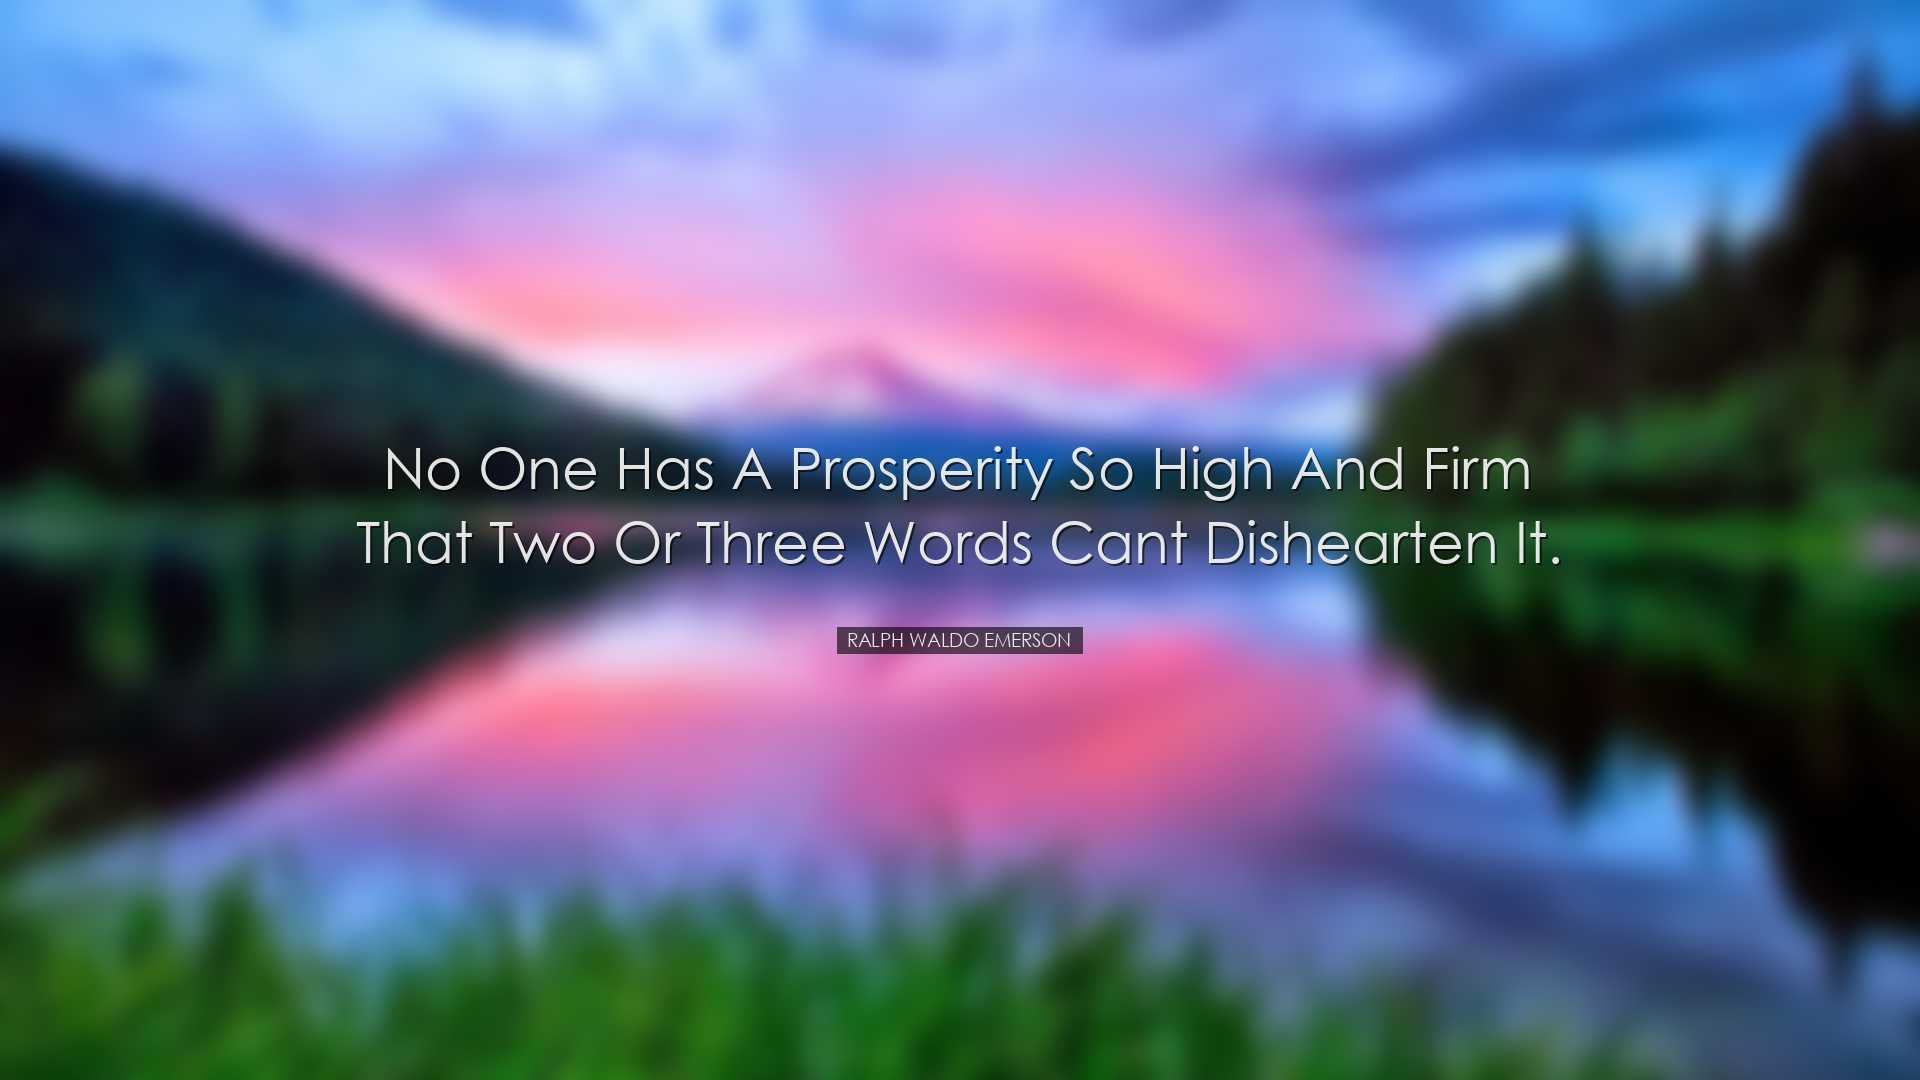 No one has a prosperity so high and firm that two or three words c